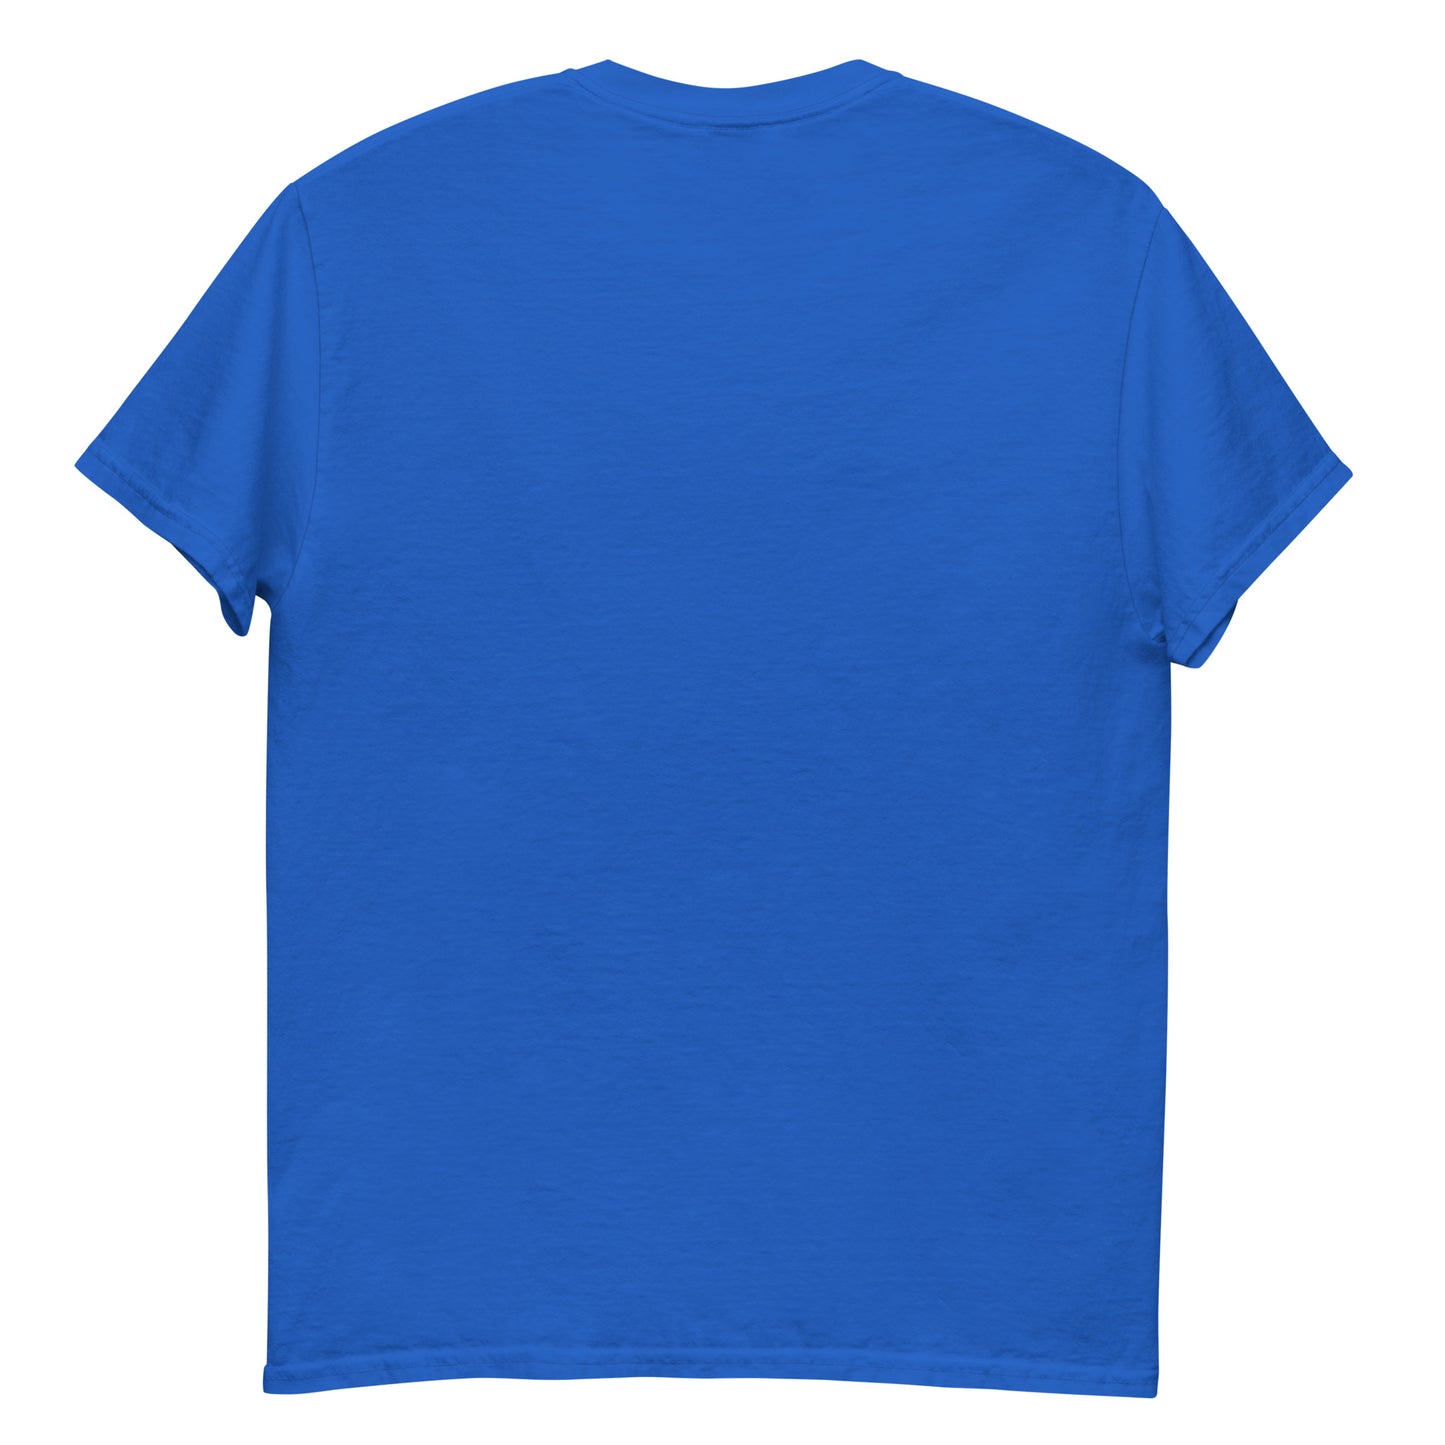 Men's classic T Shirt | Blue and White